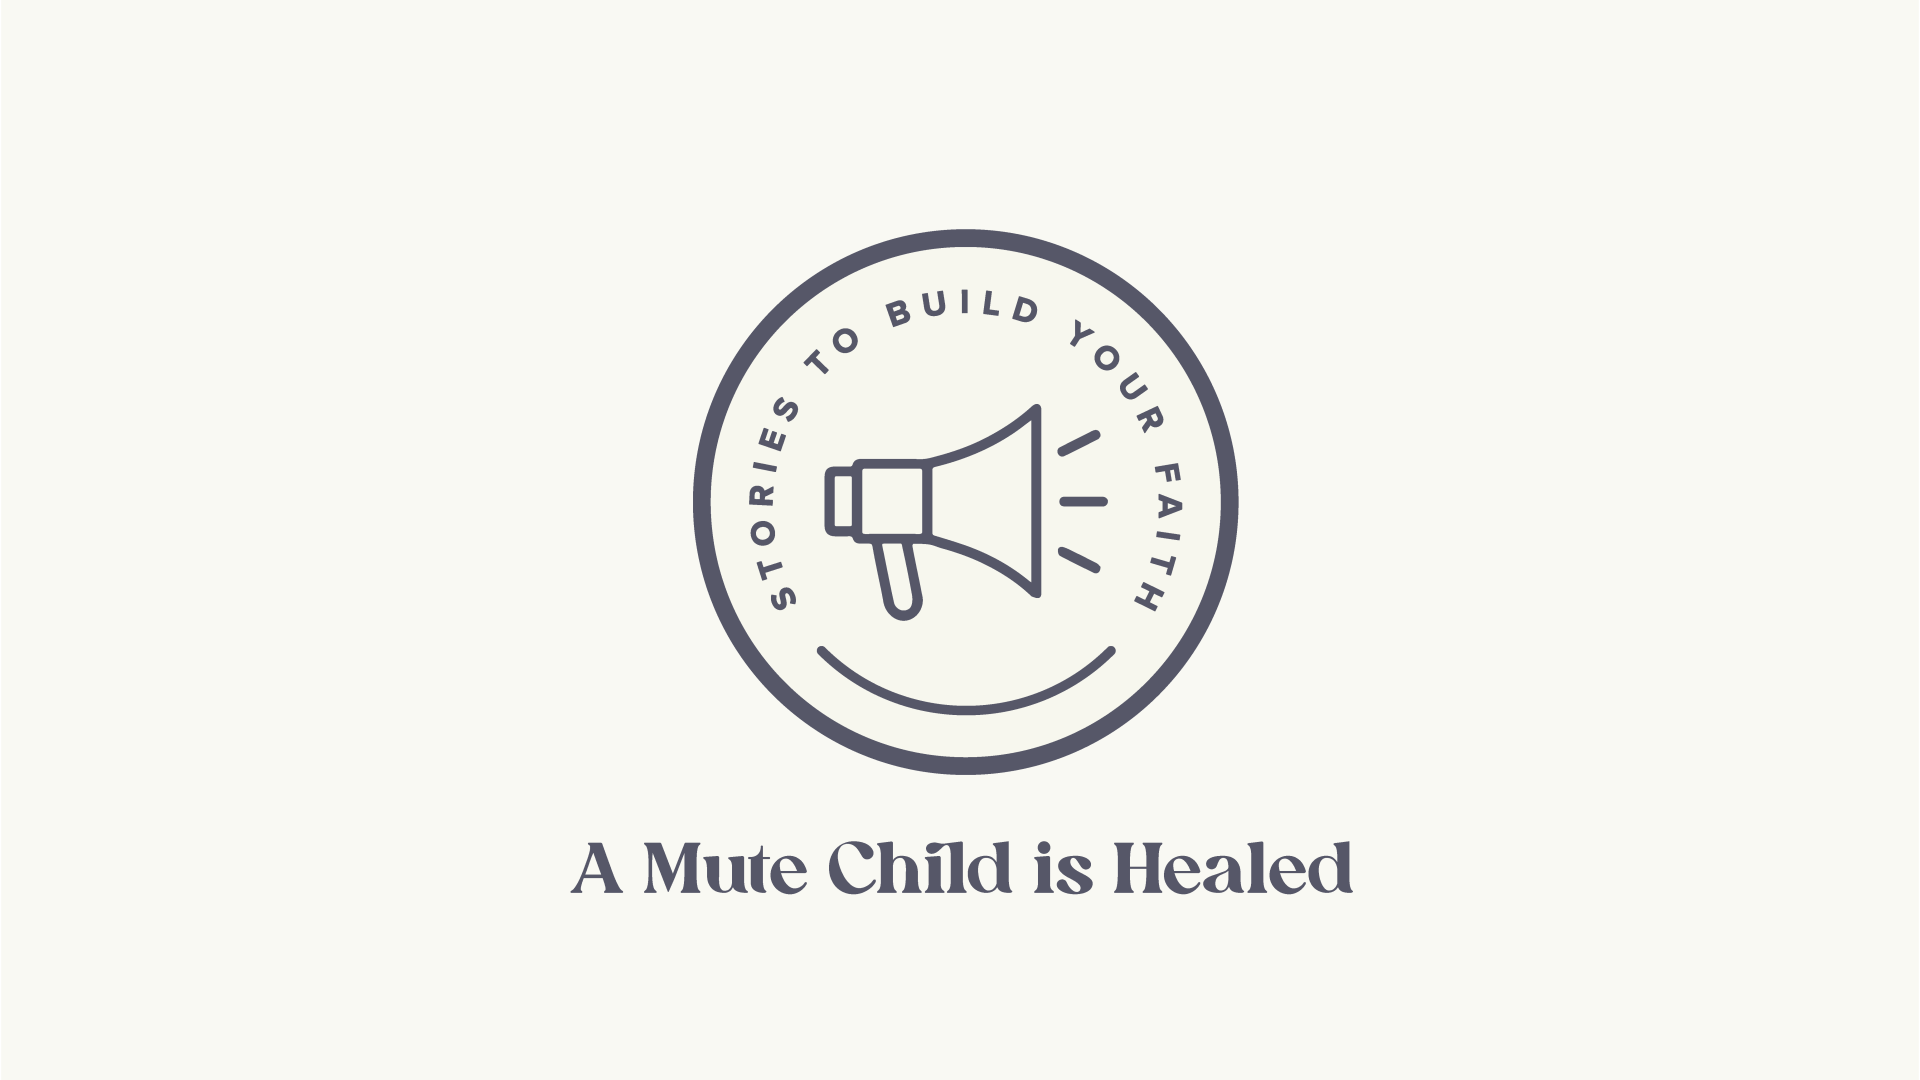 A Mute Child is Healed